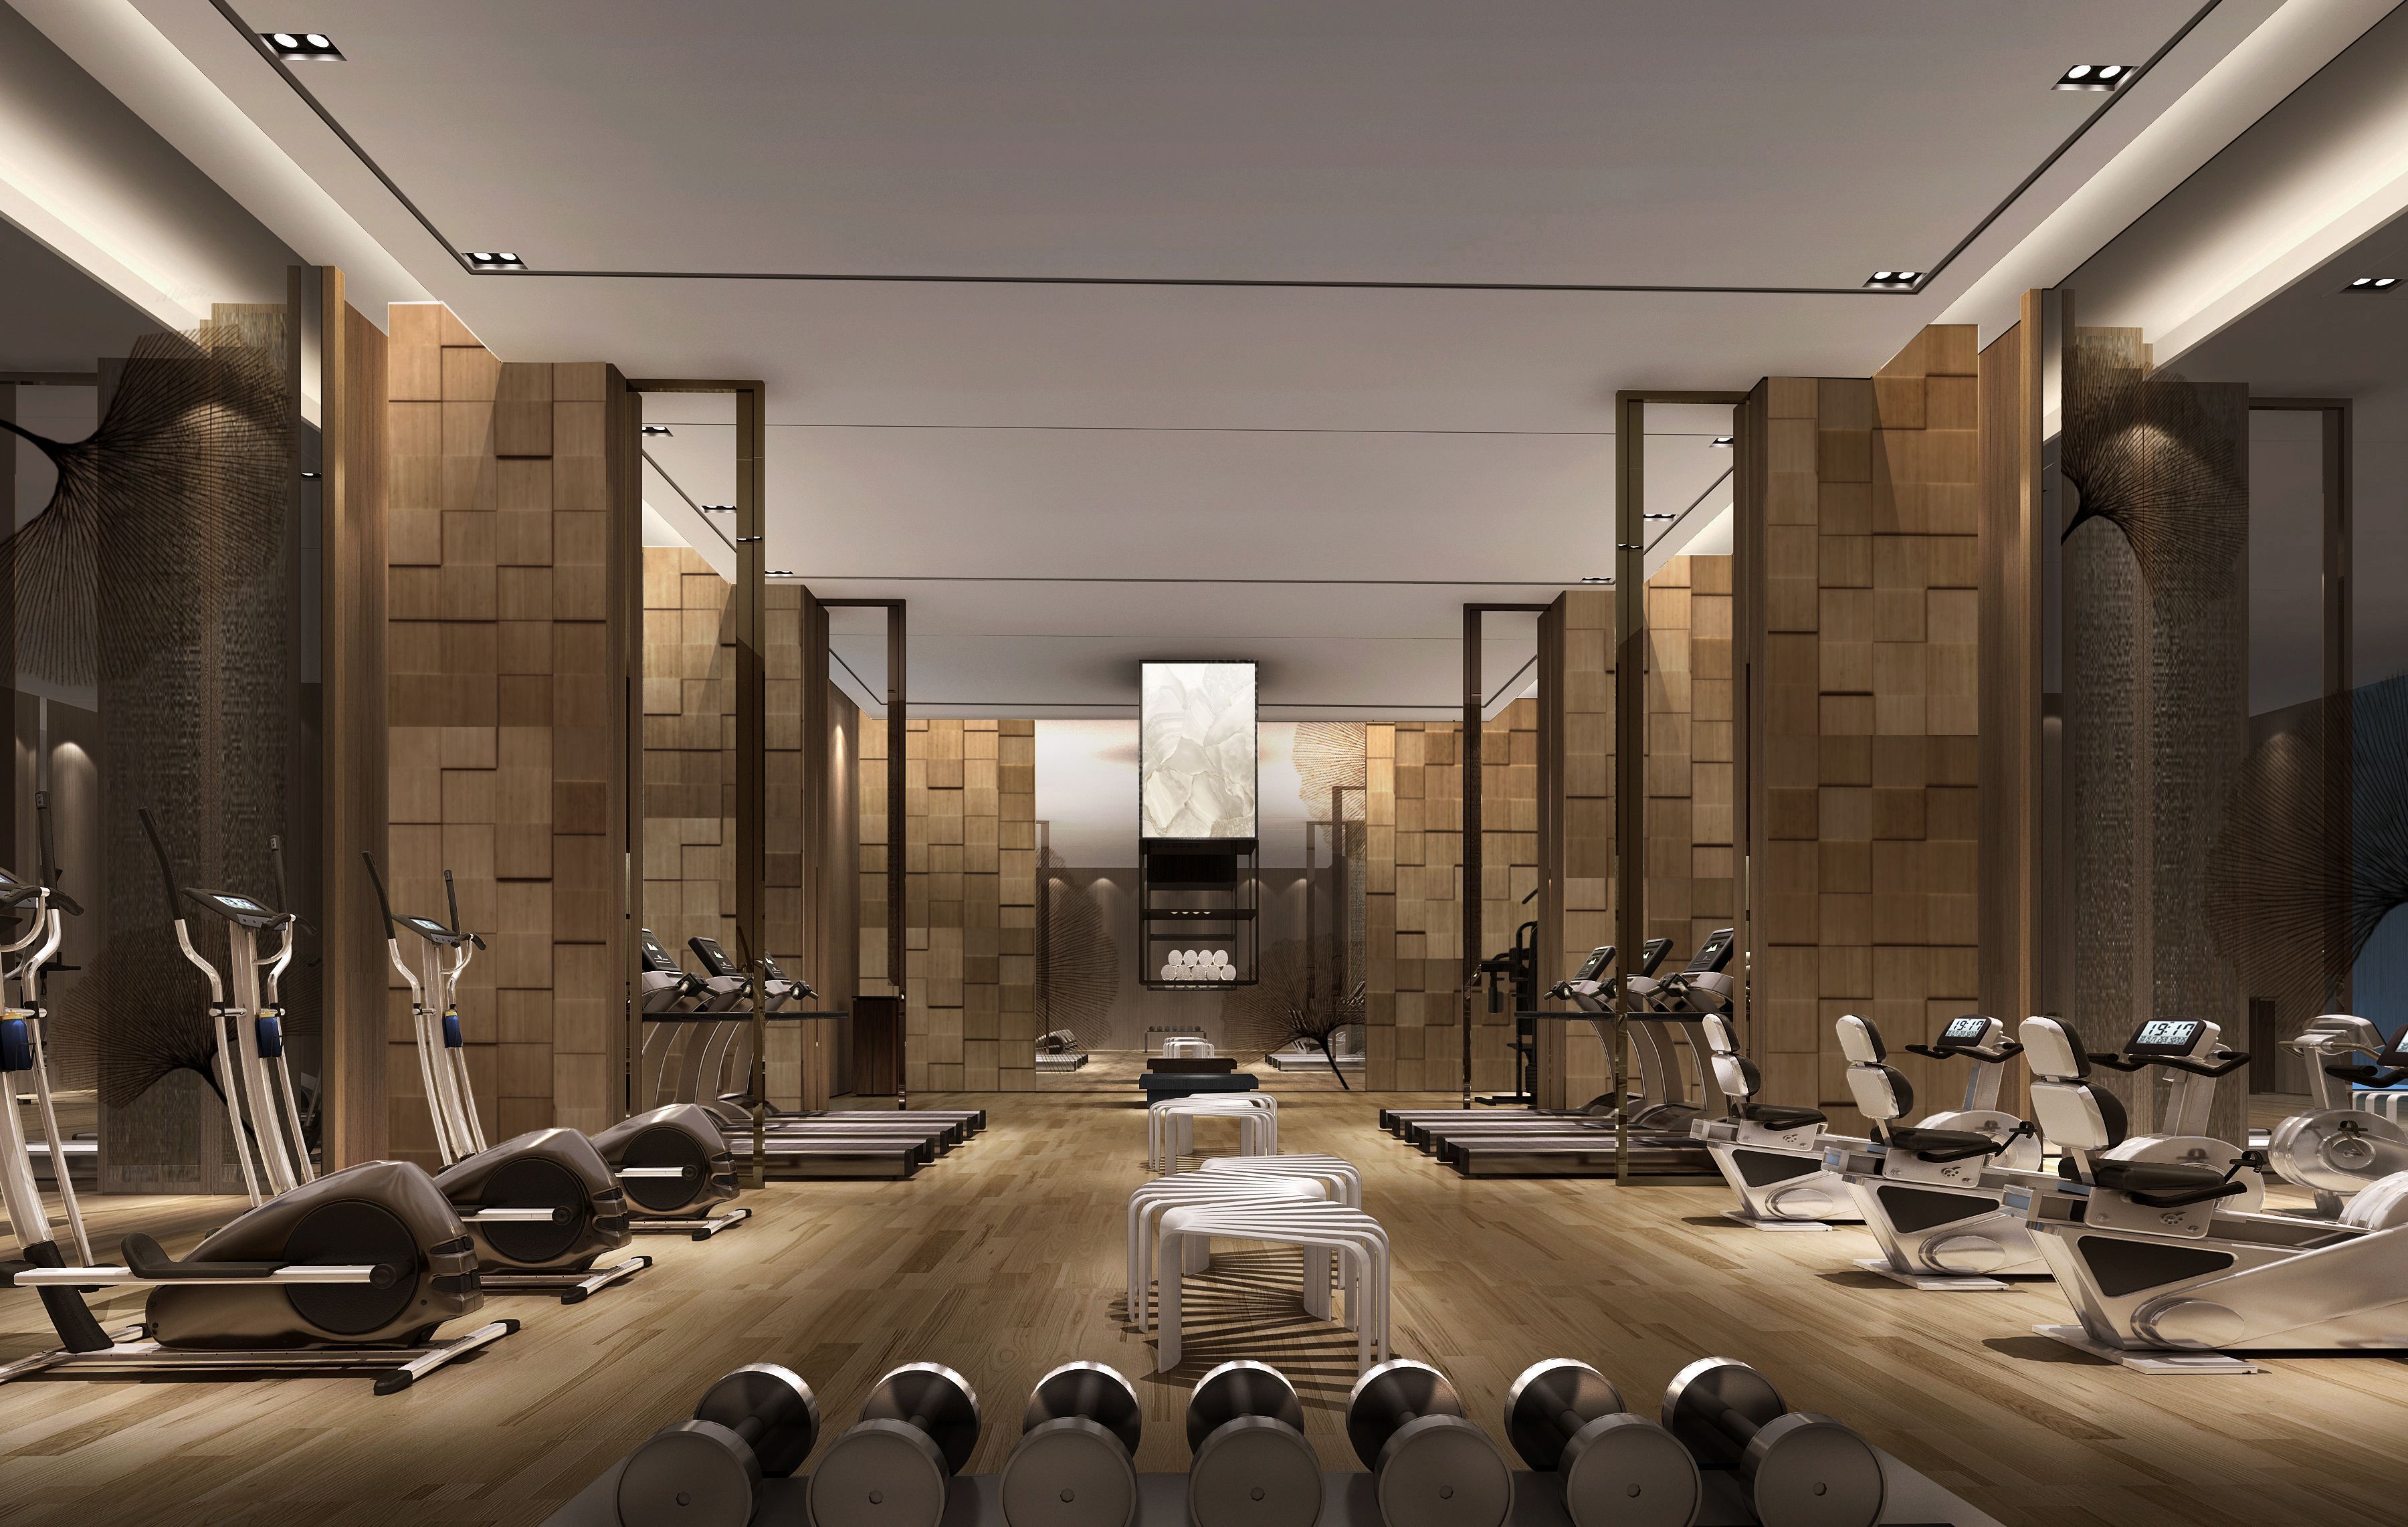 Sprawling London eight-bedroom mansion with palatial gym complex -   13 office fitness Center ideas